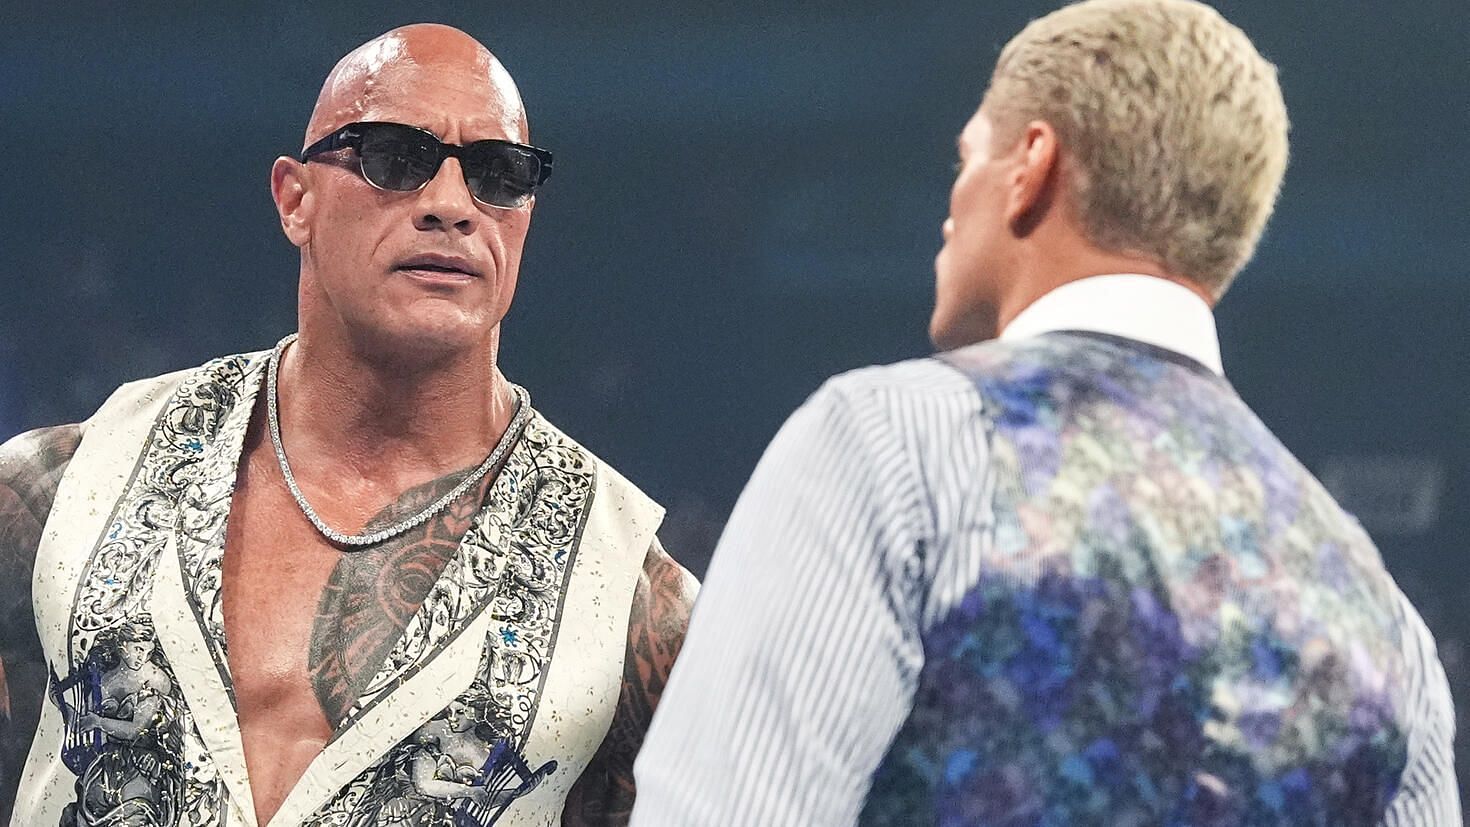 The Rock confronted Cody Rhodes on RAW